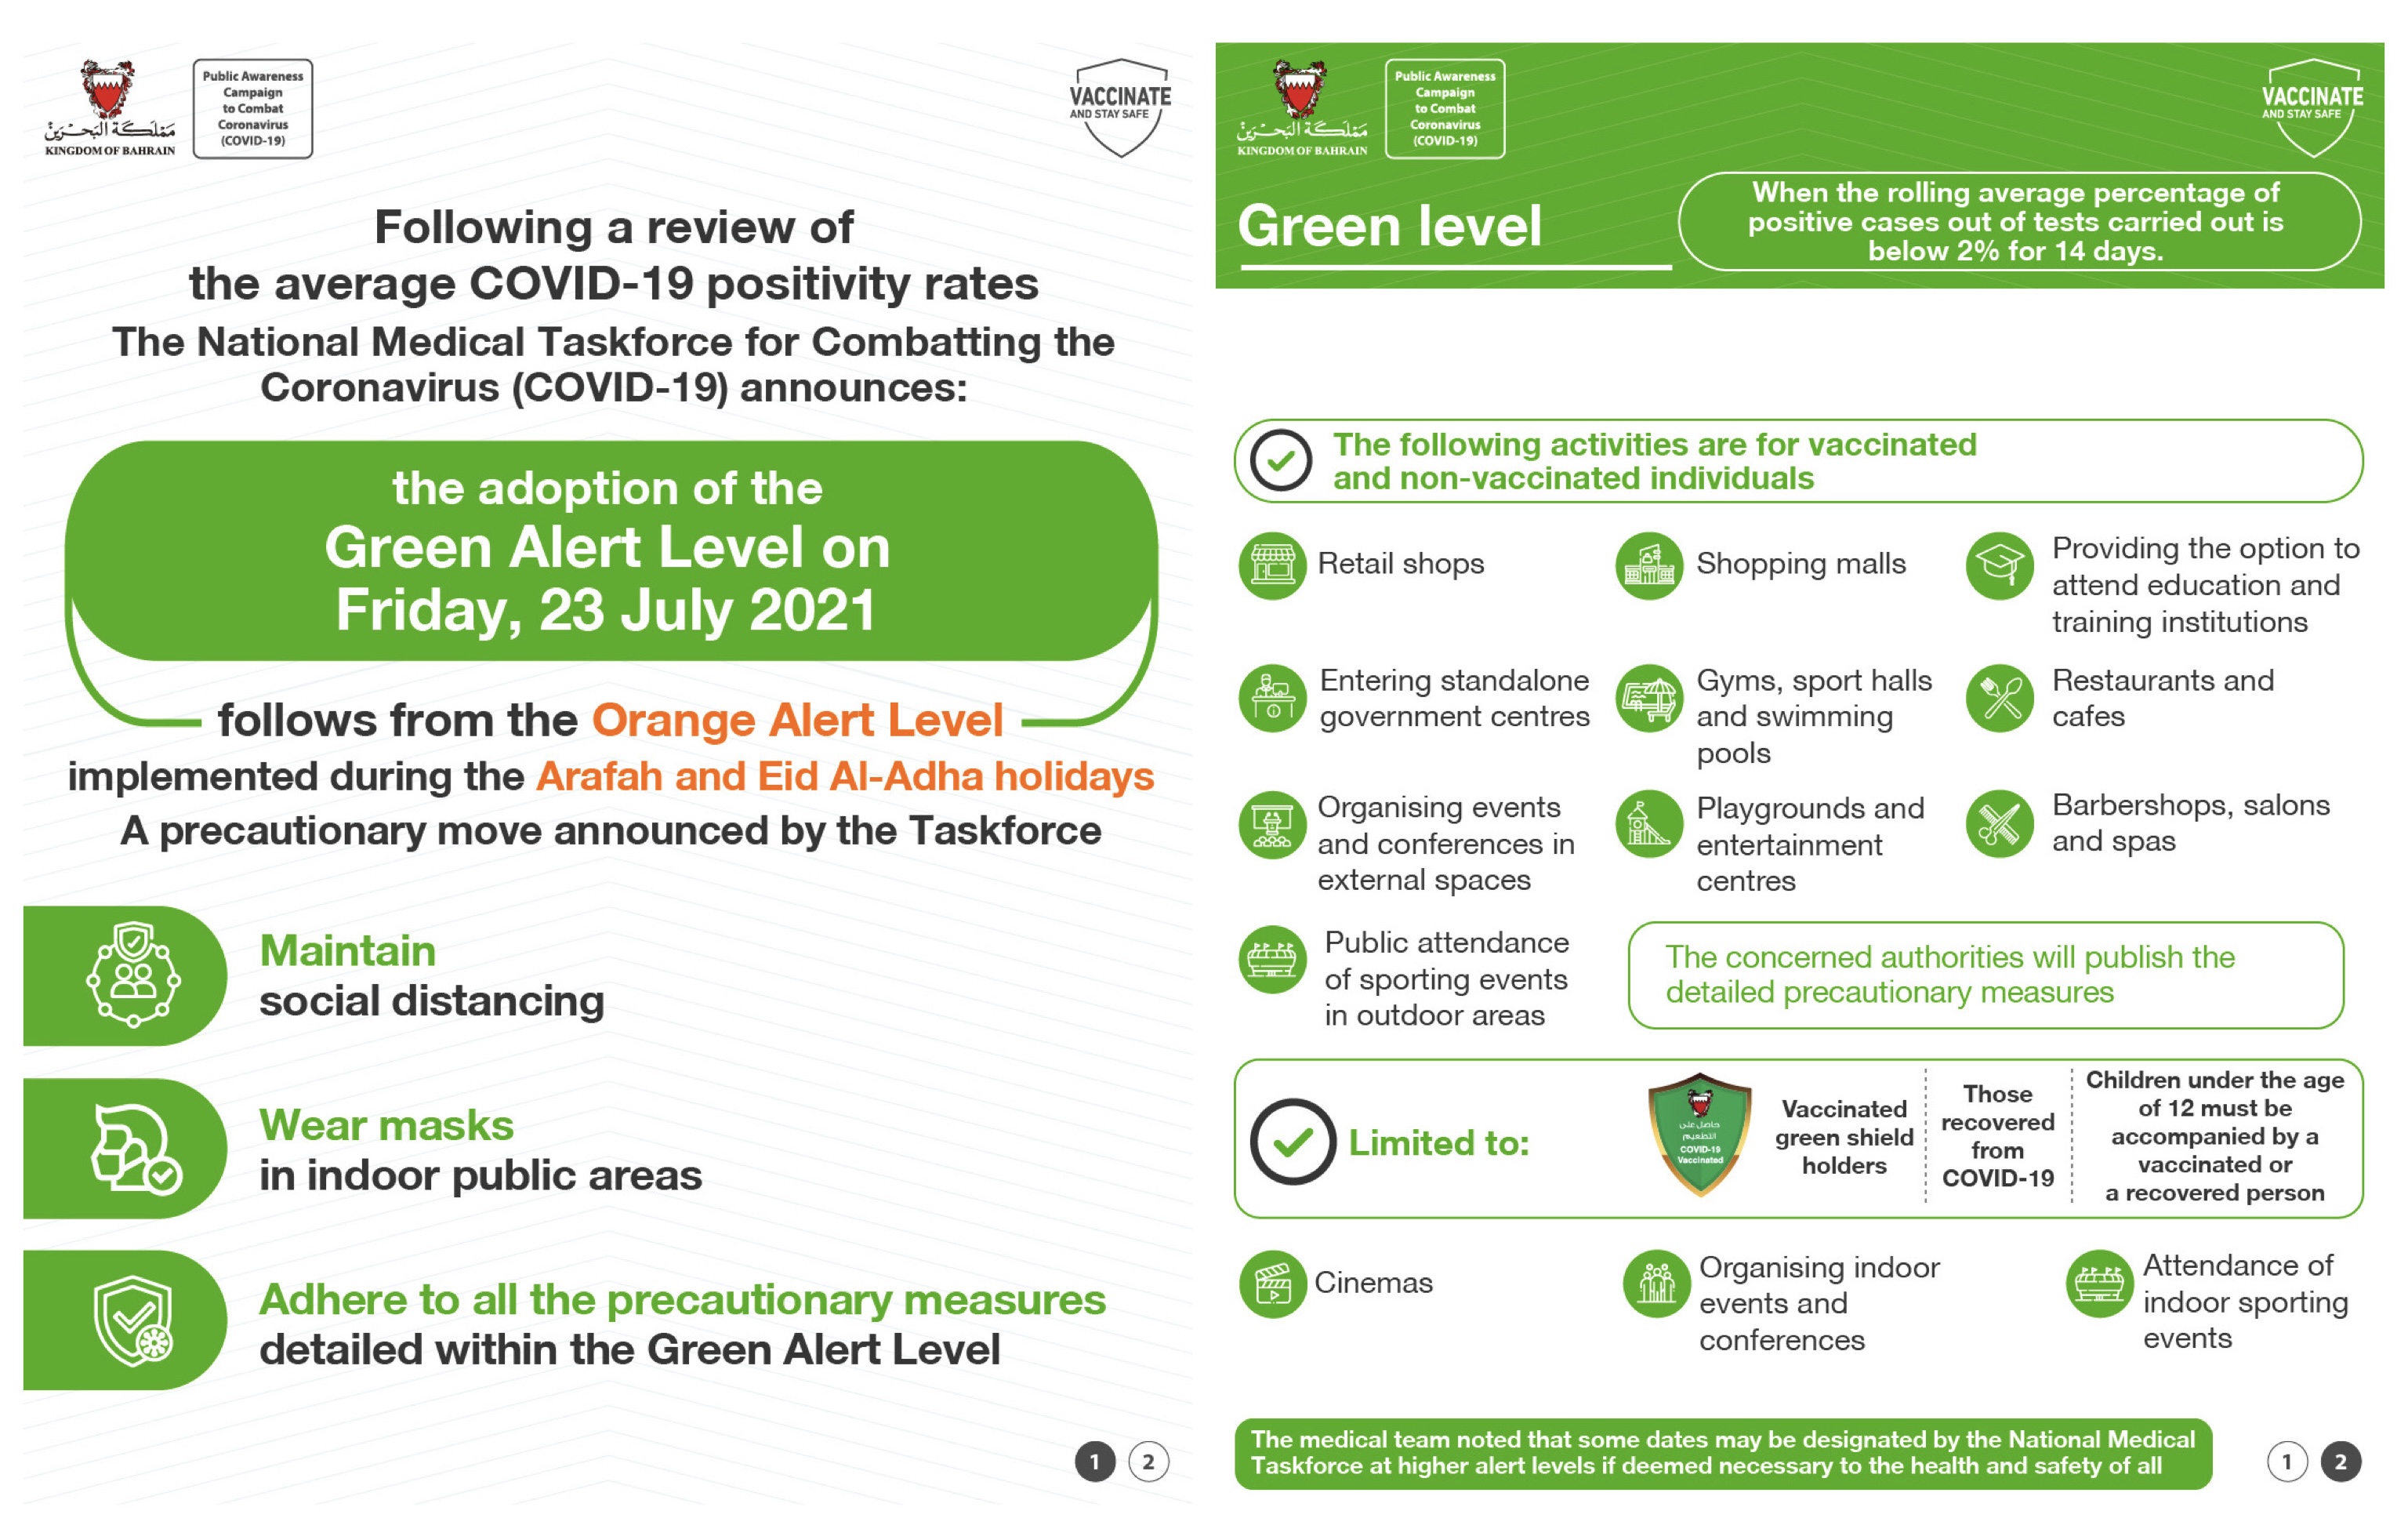 The National Medical Taskforce for Combatting the Coronavirus (COVID-19) details the conditions for moving to the Green Alert Level on Friday